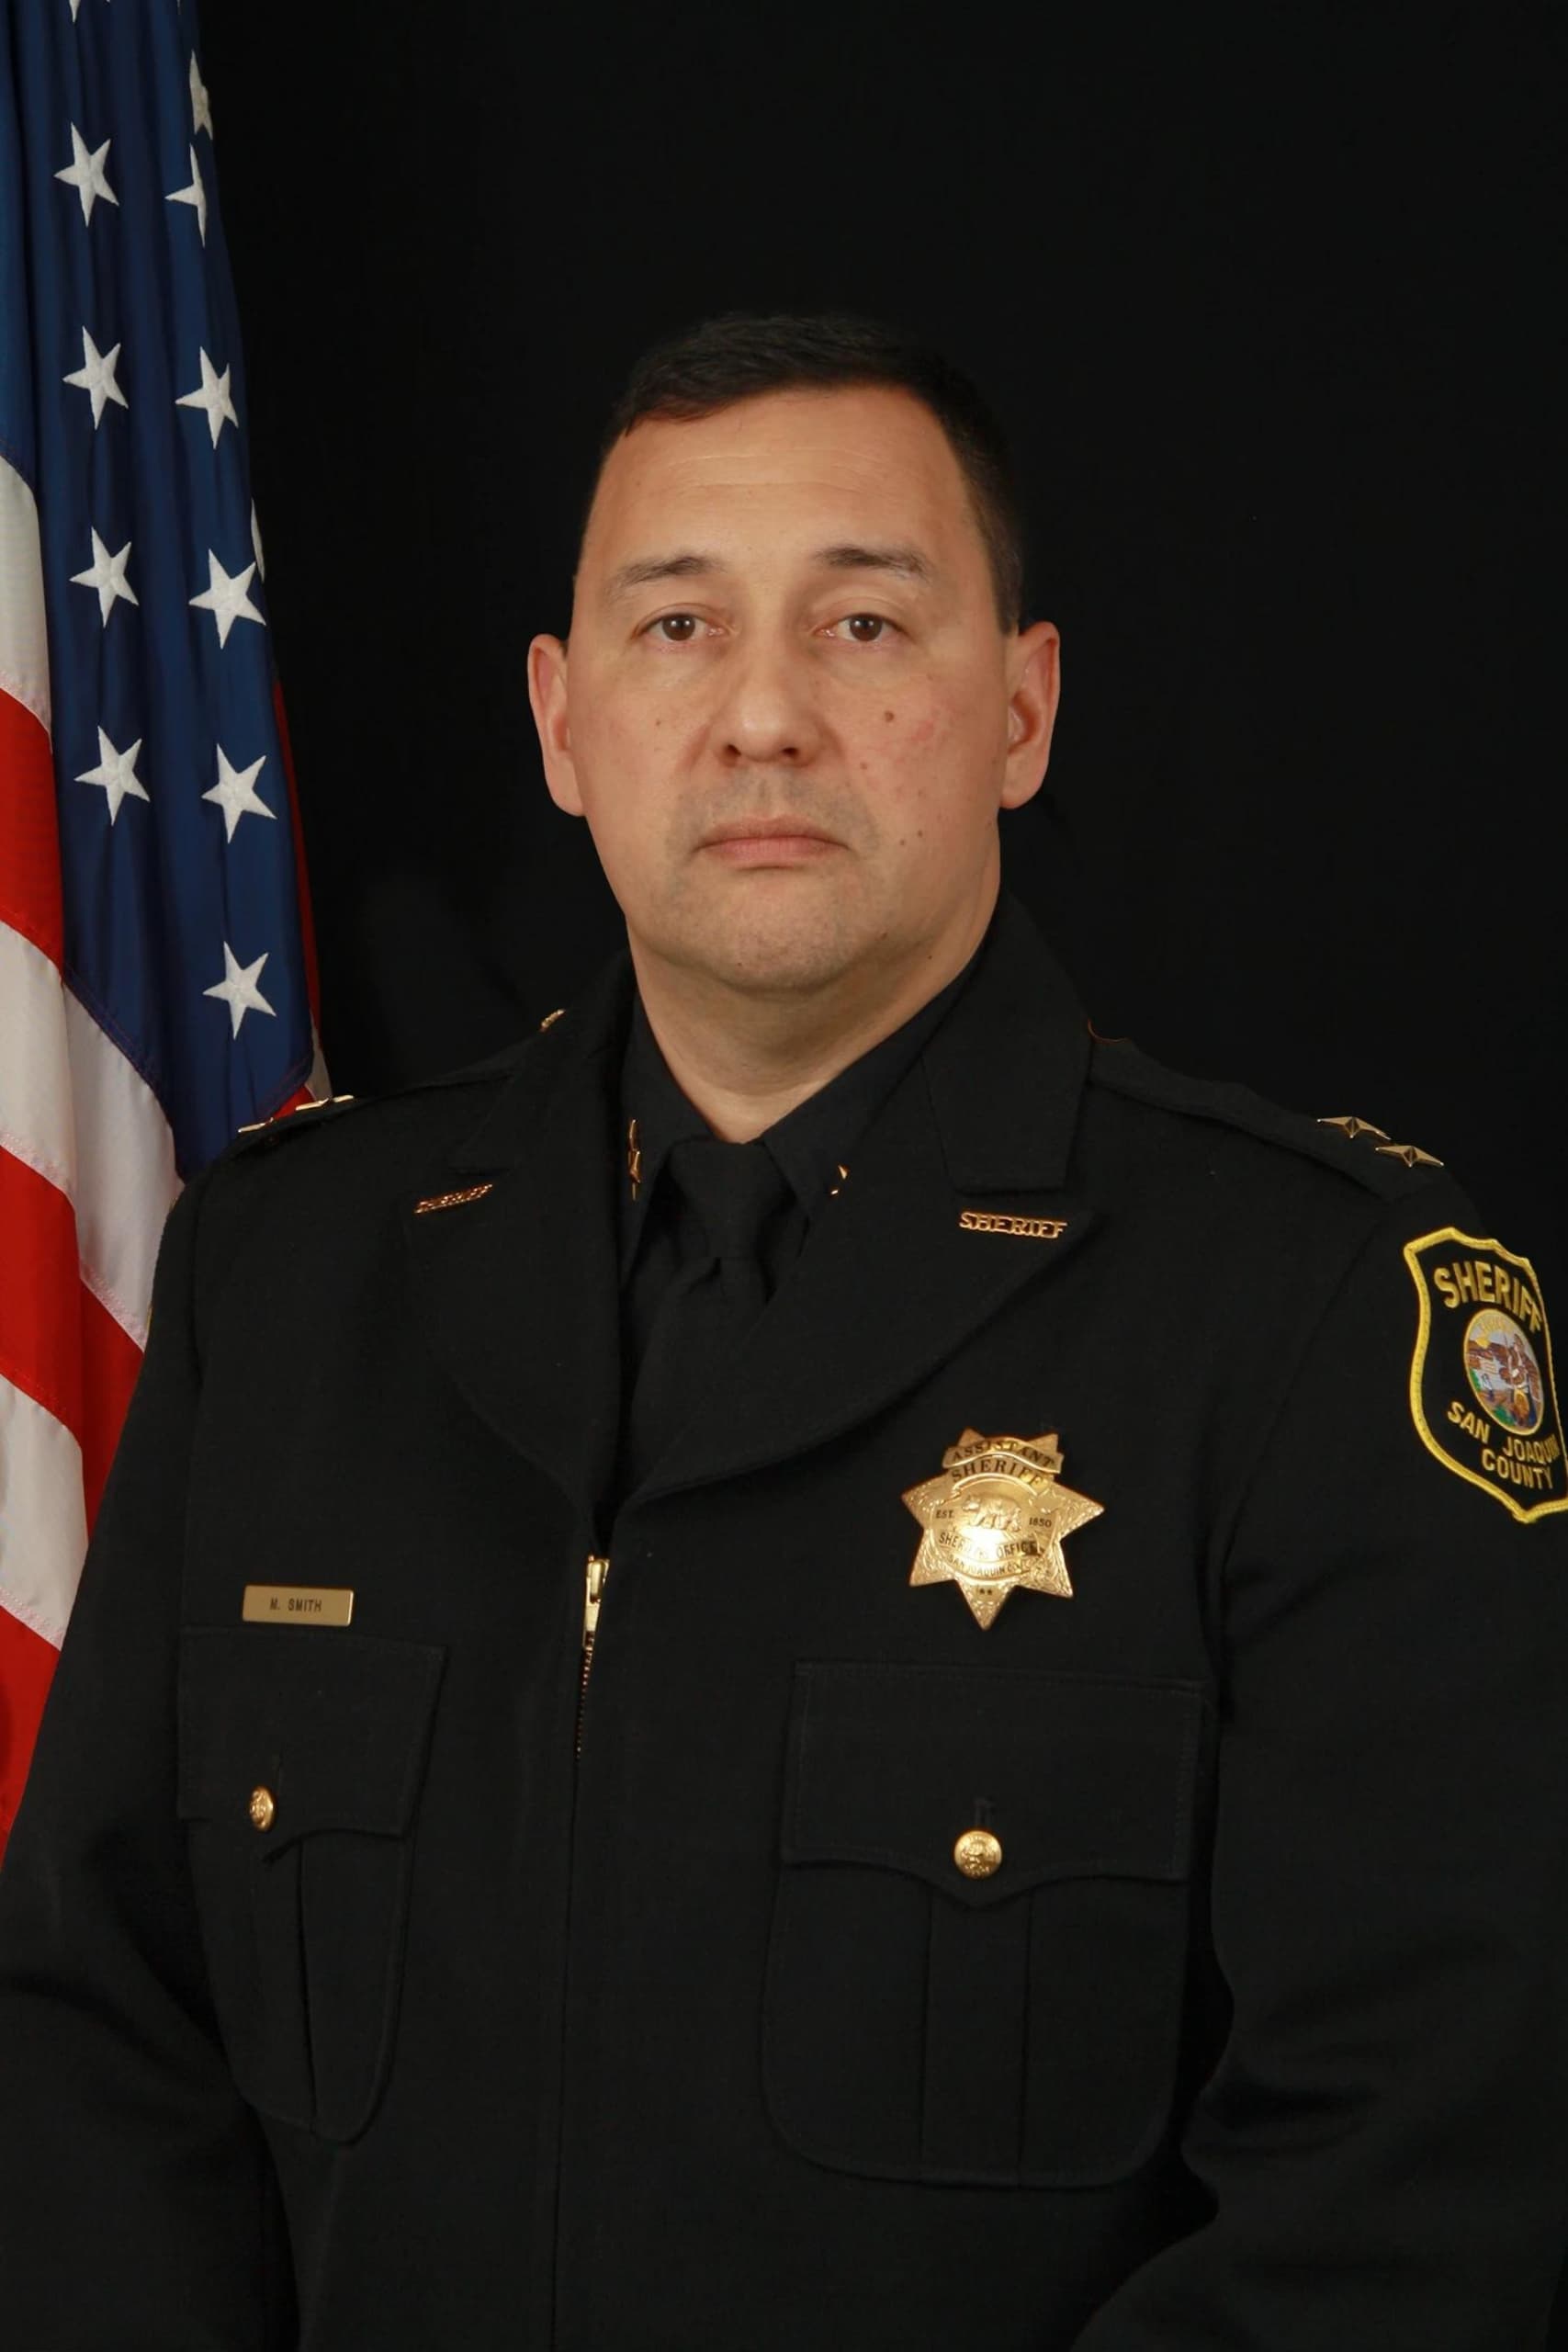 San Joaquin County Sheriff's Office Assistant Sheriff Marcus Smith